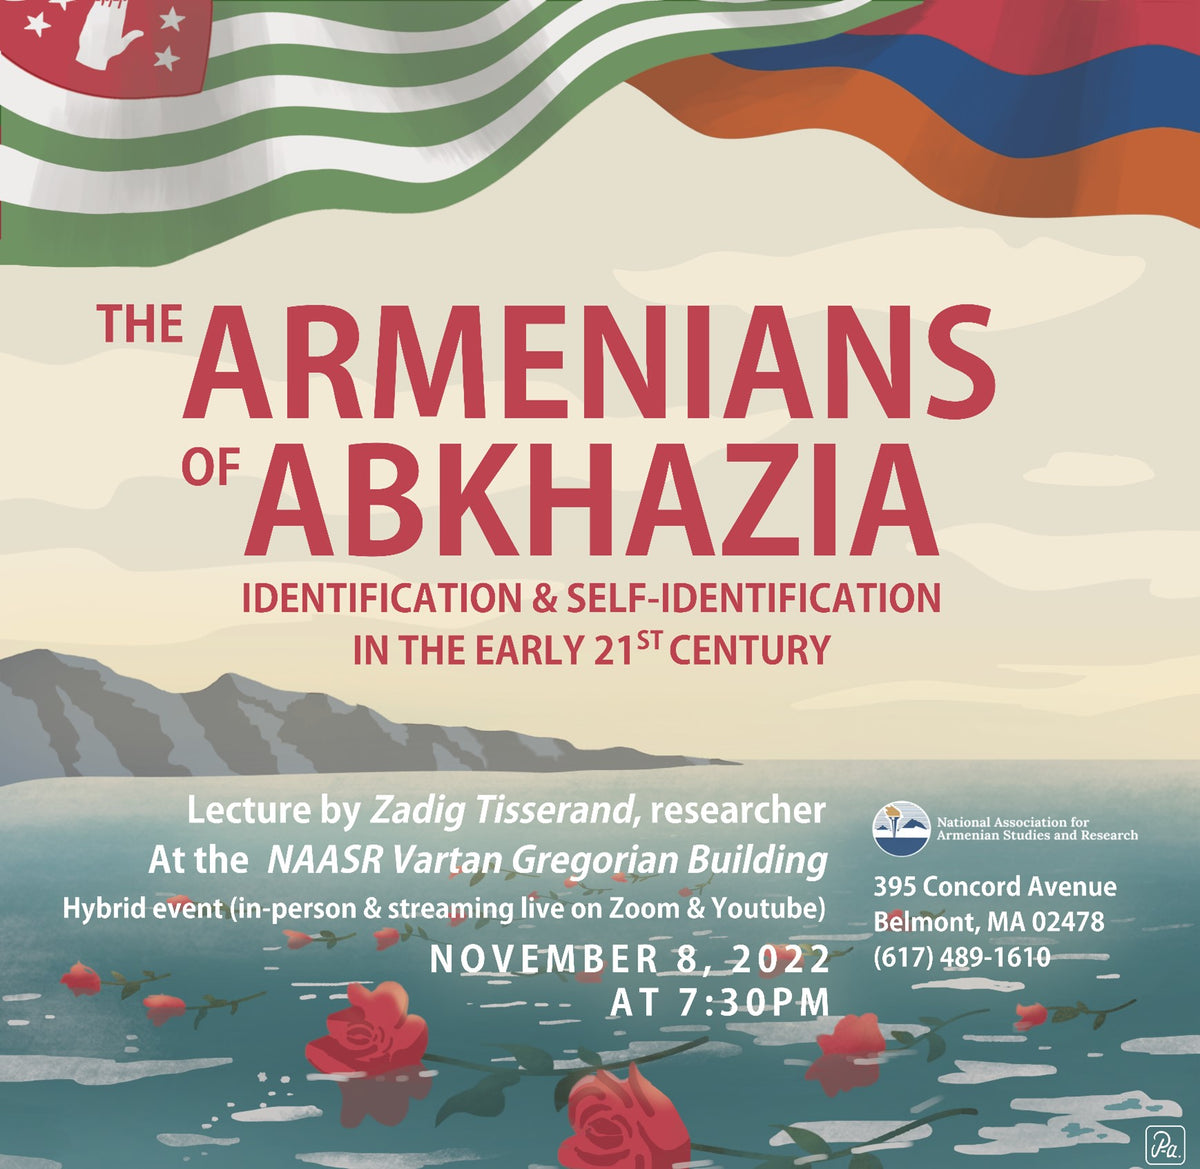 THE ARMENIANS OF ABKHAZIA Identification and Self-Identification in the